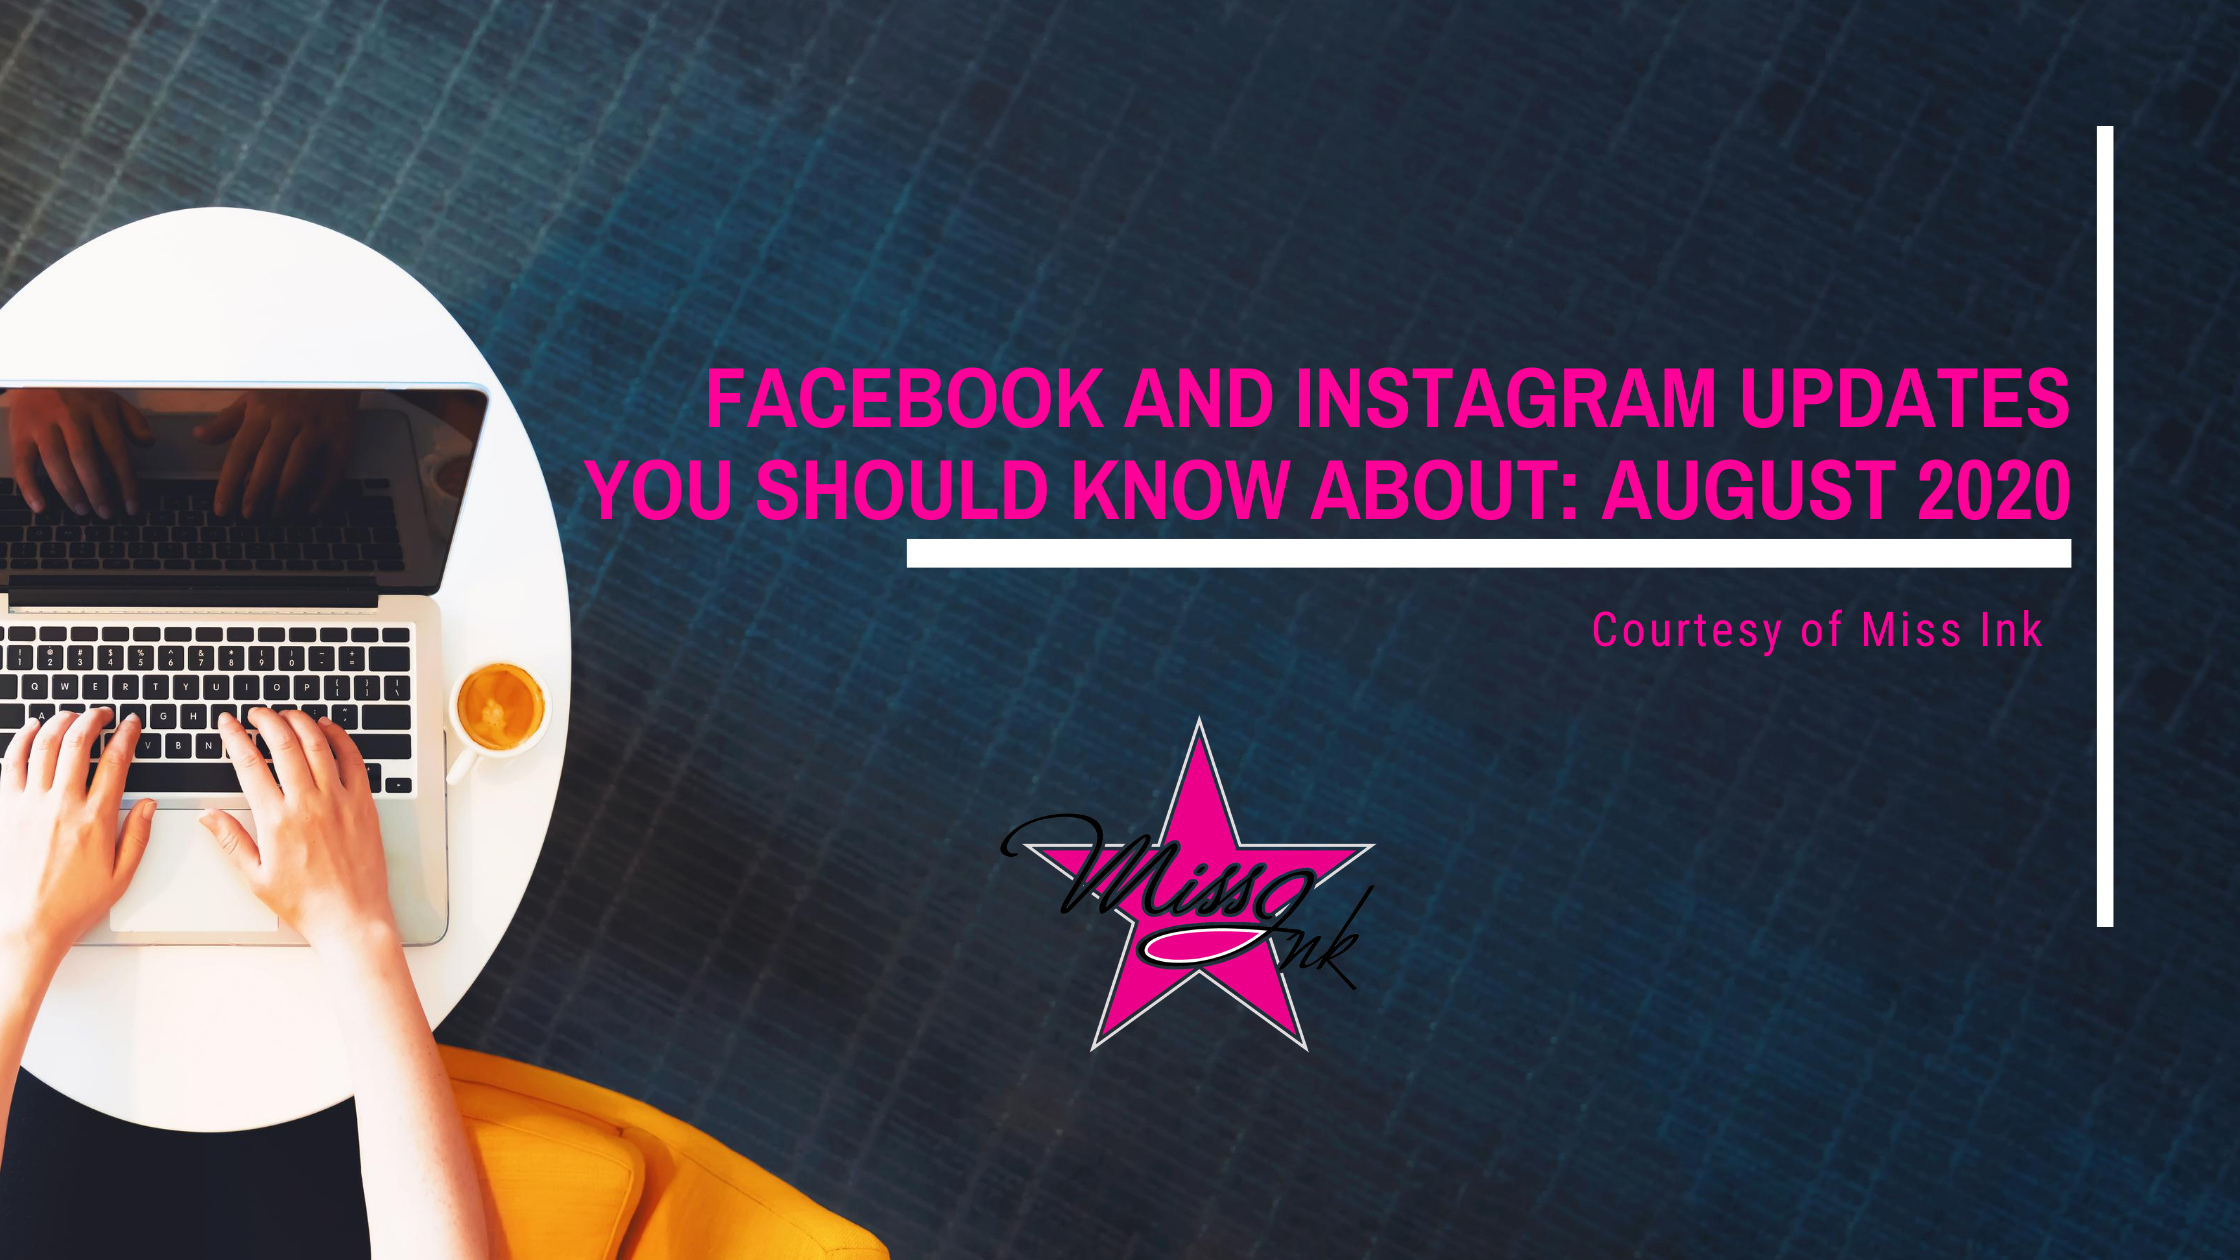 Facebook and Instagram Updates You Should Know About: August 2020